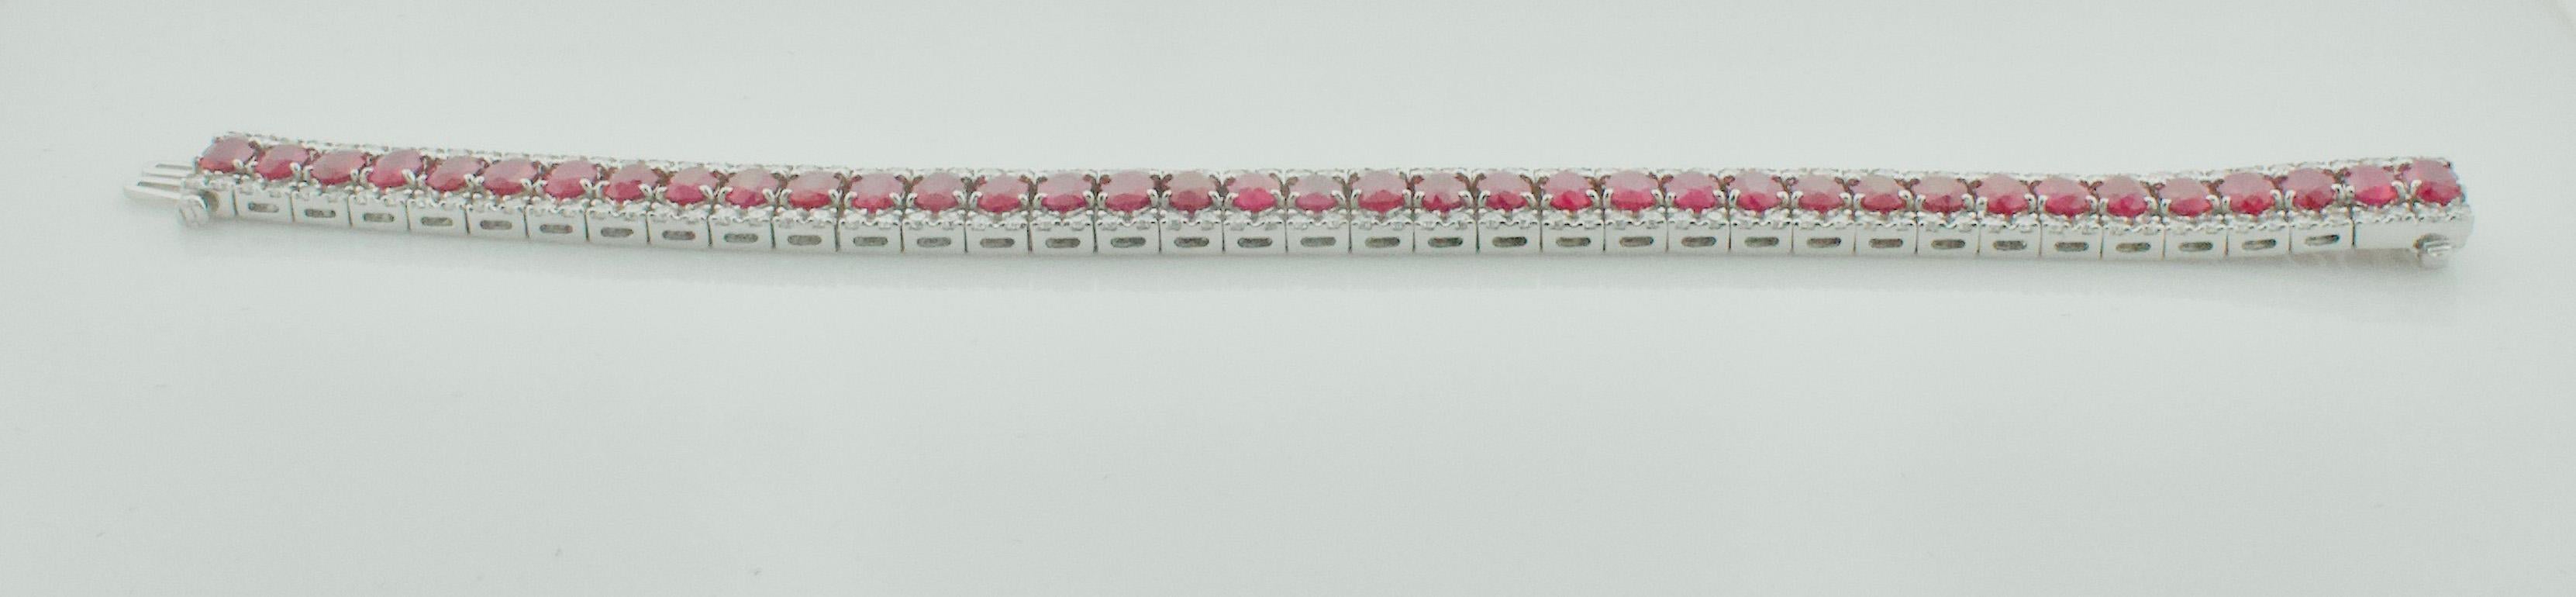 Burmese Ruby and Diamond Bracelet with GIA Certificate 20.00 Carat of Rubies For Sale 1